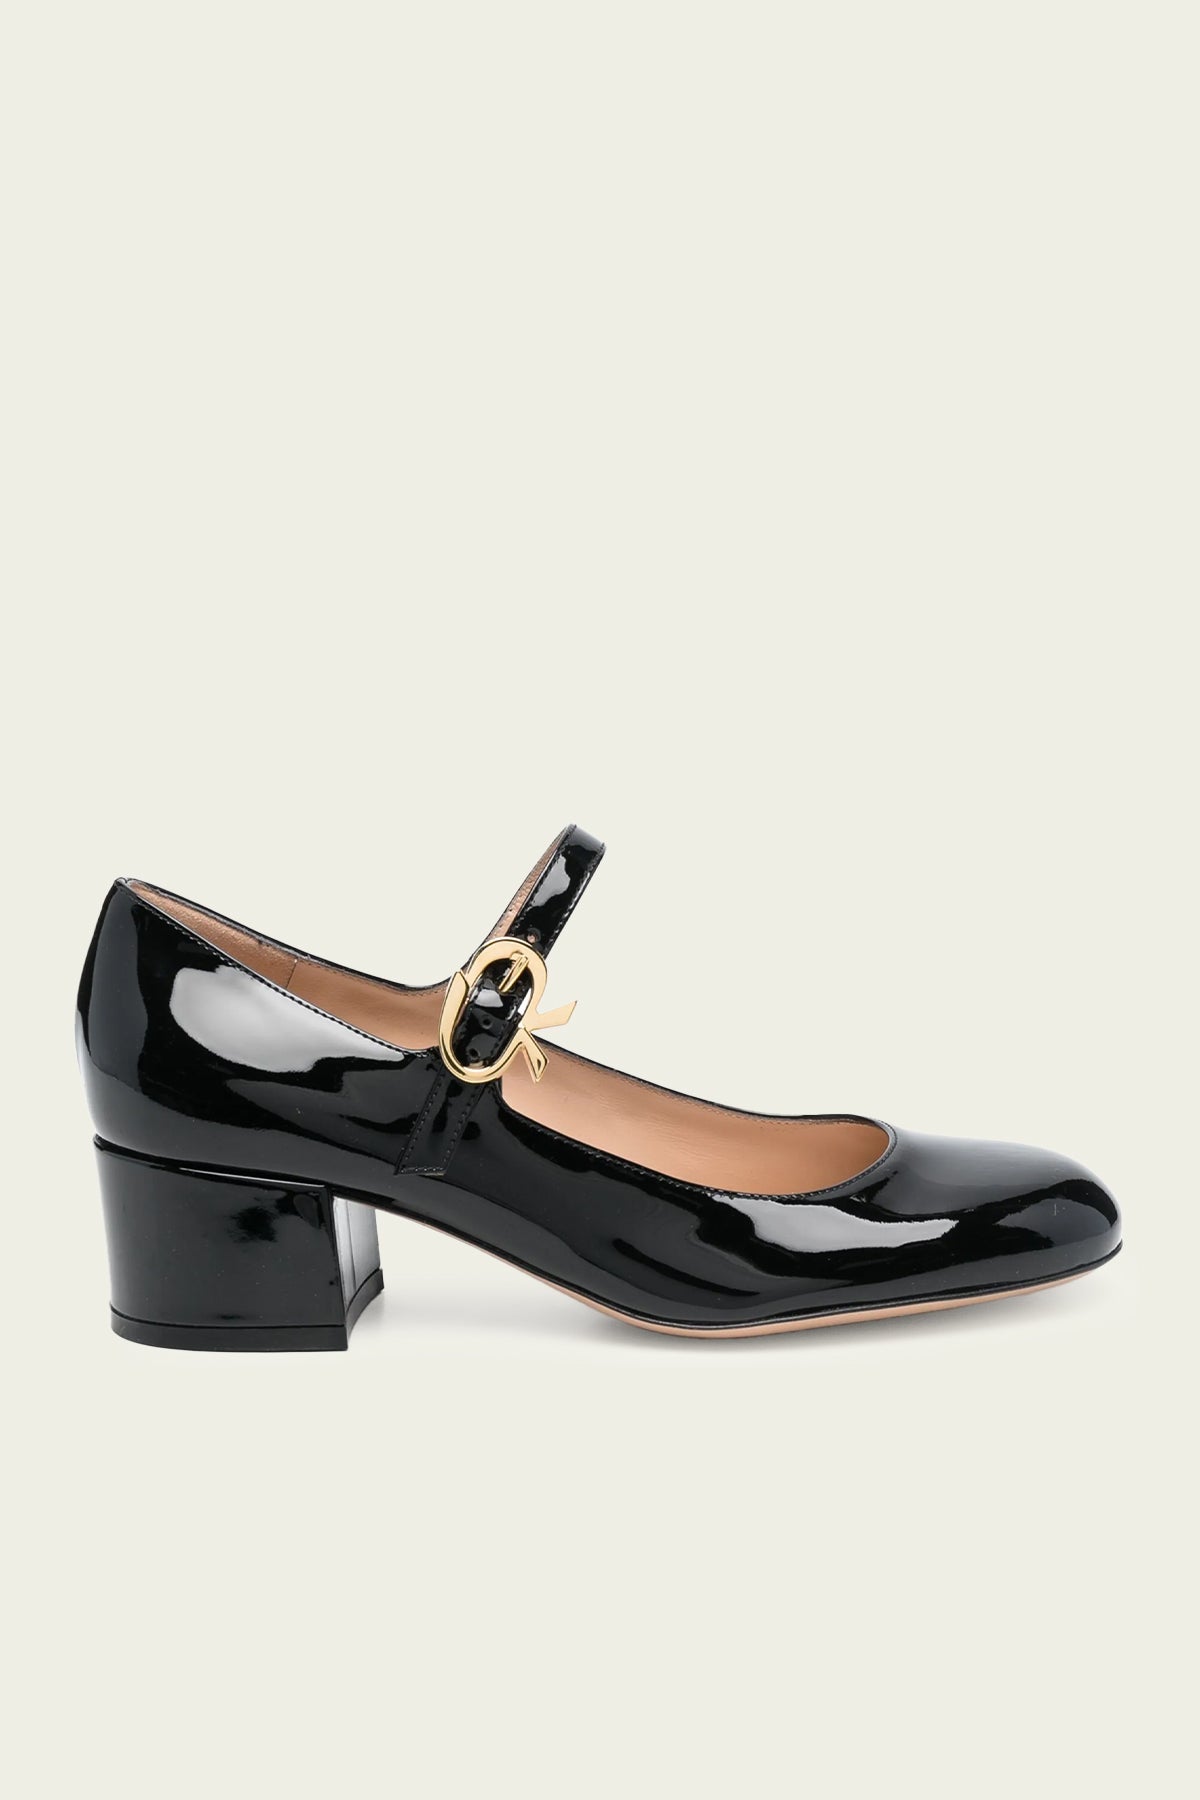 Mary Ribbon Patent Leather Pump in Black - shop-olivia.com